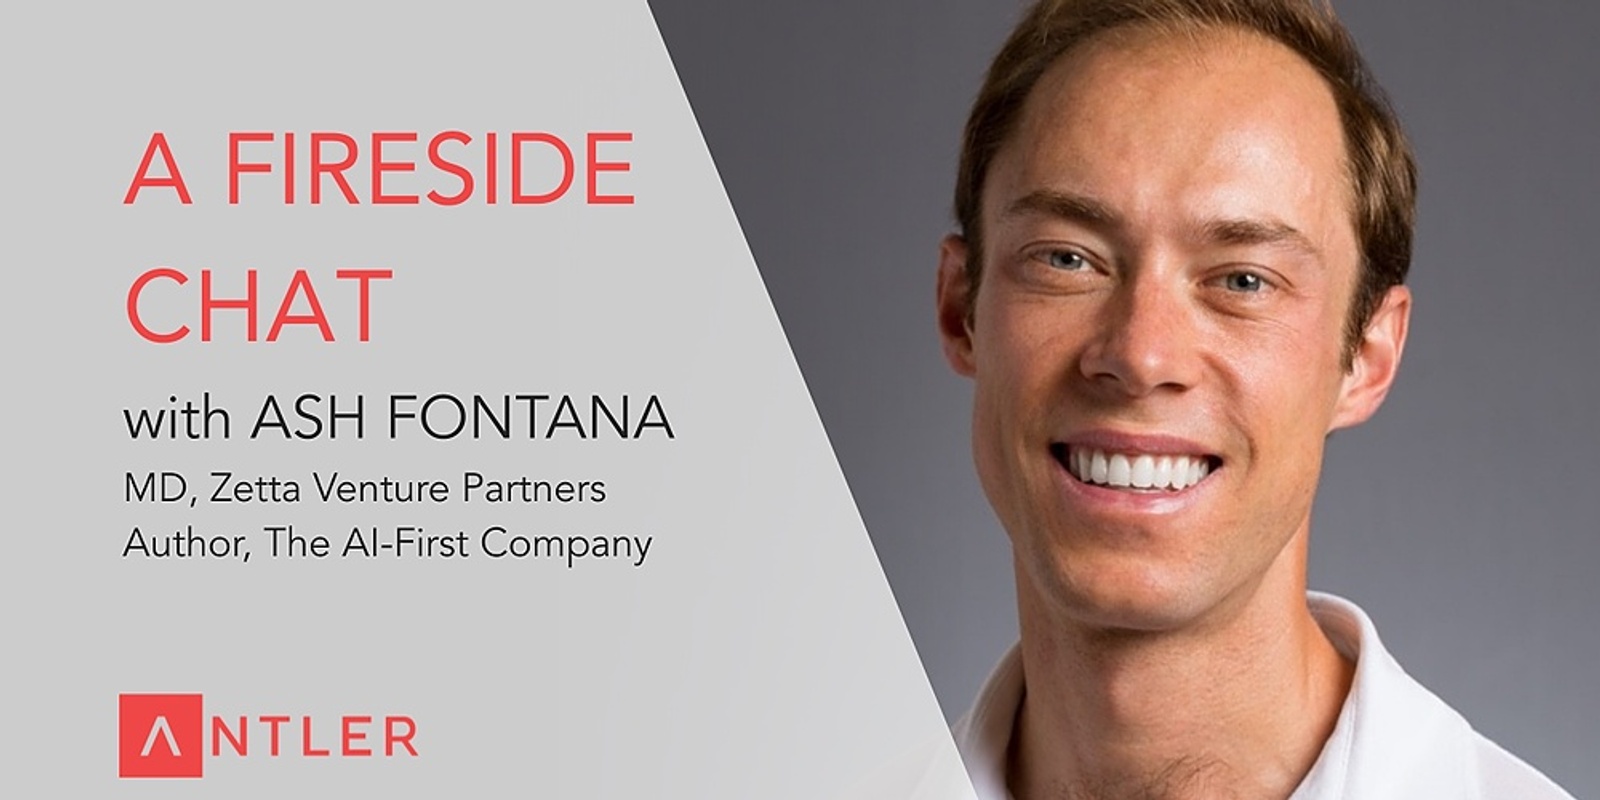 Banner image for Antler fireside chat with Ash Fontana